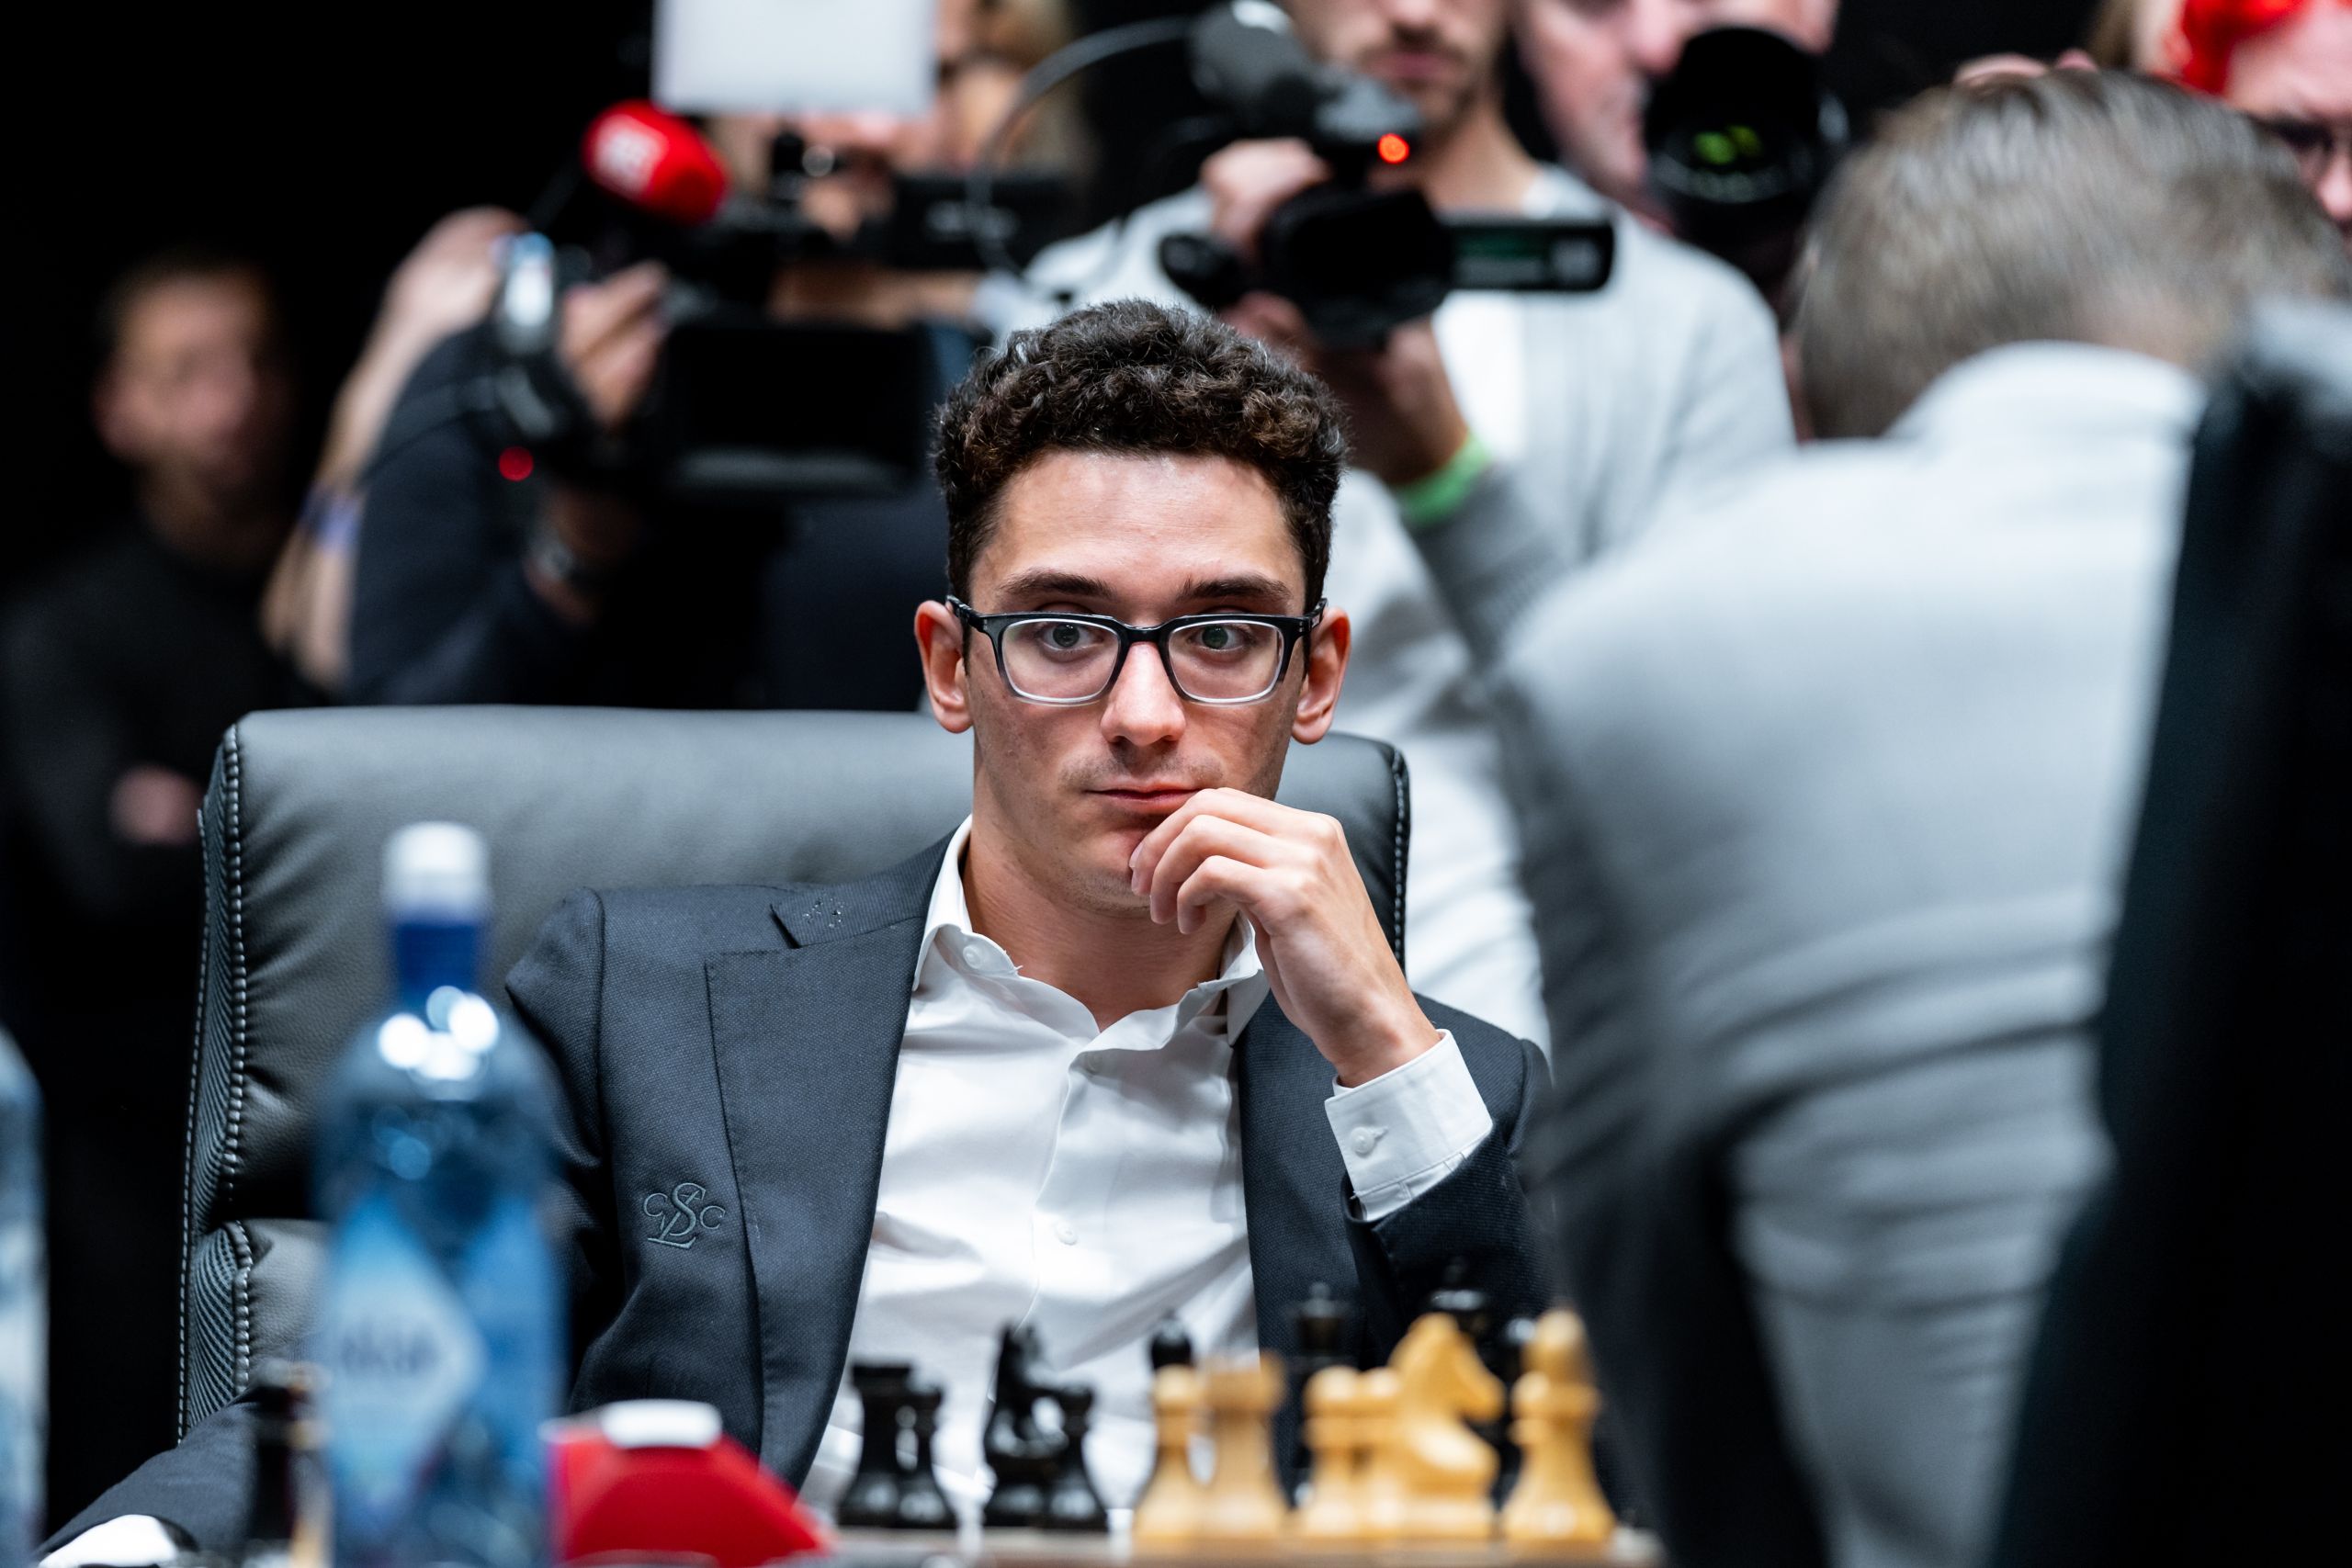 Fabiano Caruana Wins The Candidates Tournament, Becomes First